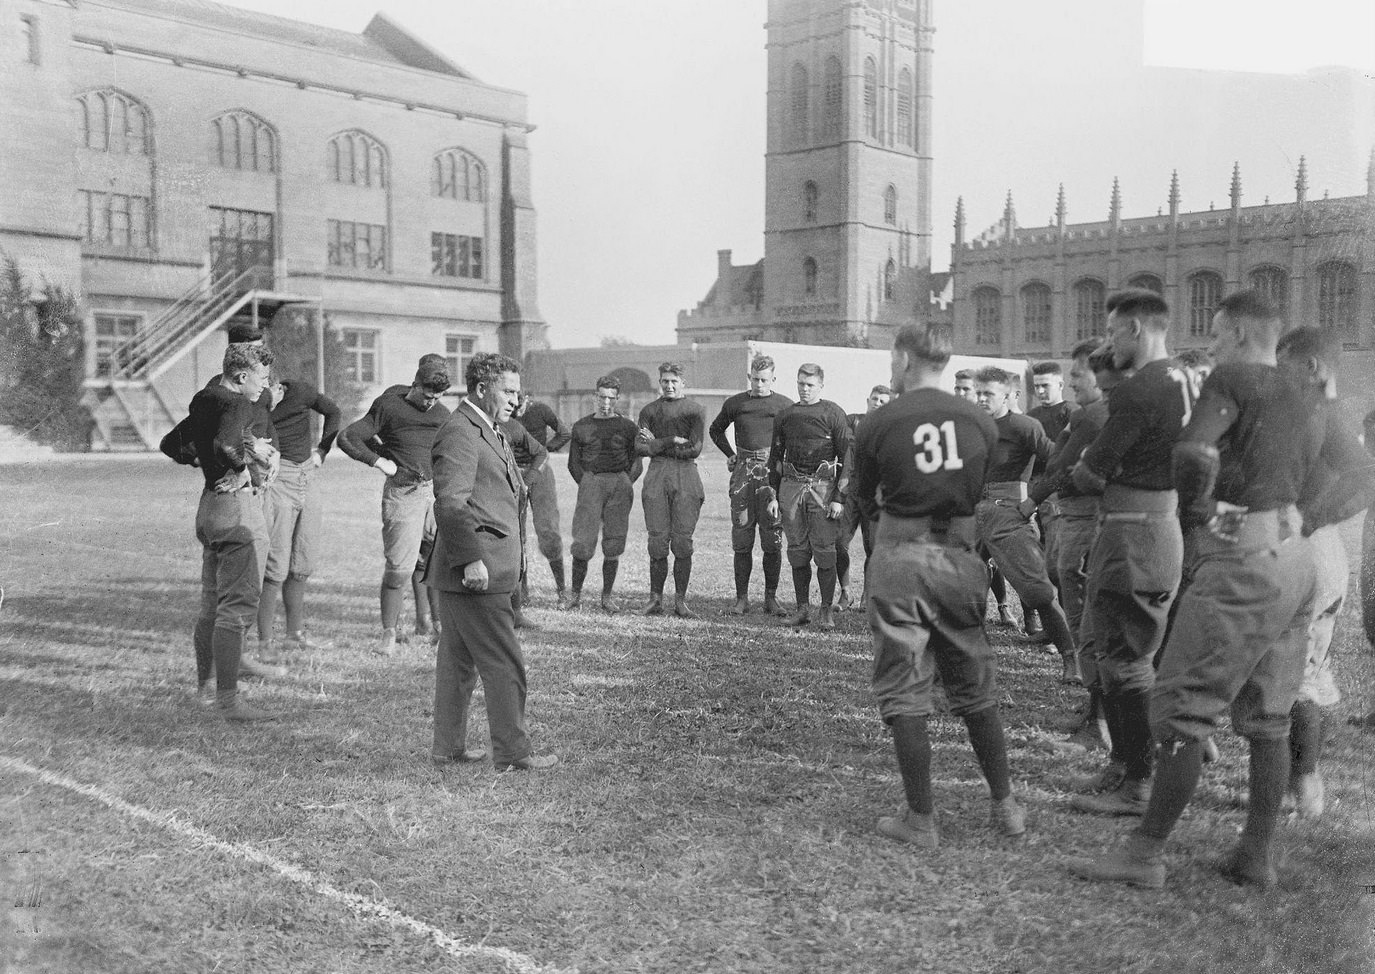 University of Chicago football team players standing around Coach Alonzo A Stagg on an athletic field at the university campus, Chicago, Illinois, 1916.